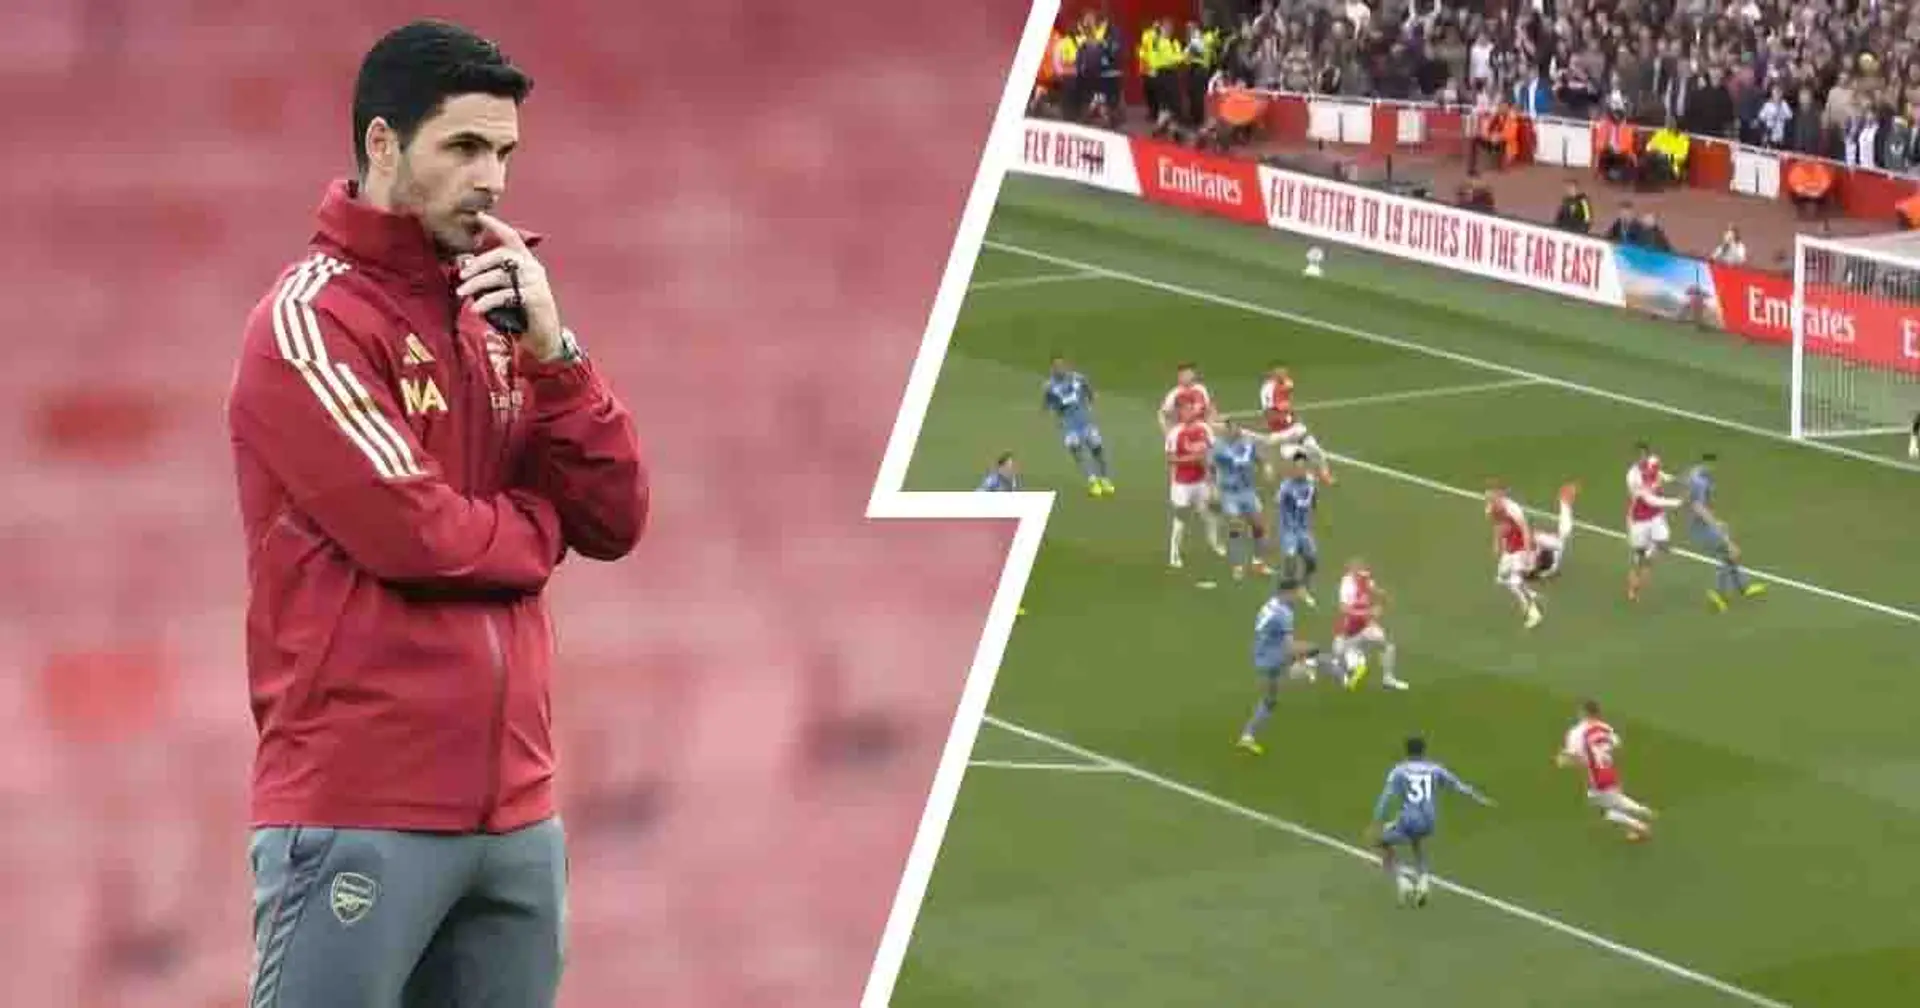 'I'd rather play with 10 men': fans want one Arsenal player subbed amid shaky Aston Villa showing